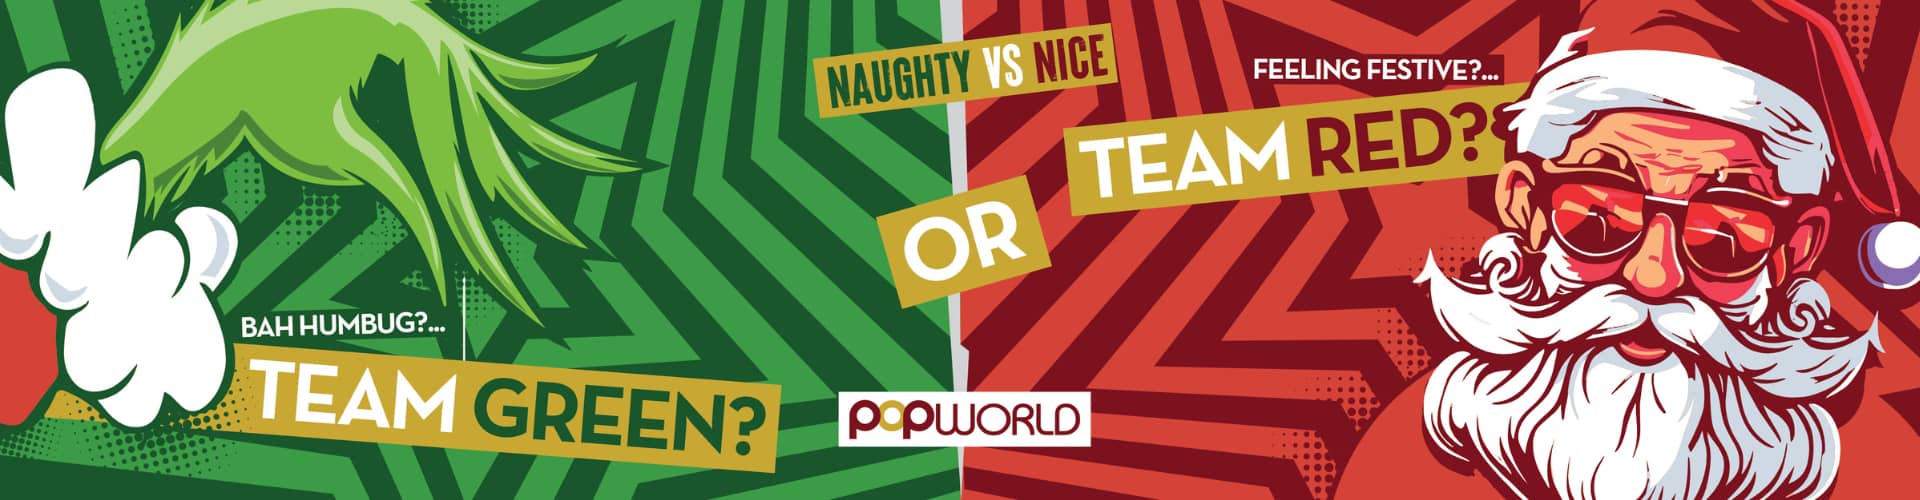 Popworld & Zinc Weston-Super-Mare - Naughty vs Nice - Are you Team Green or Team Red?